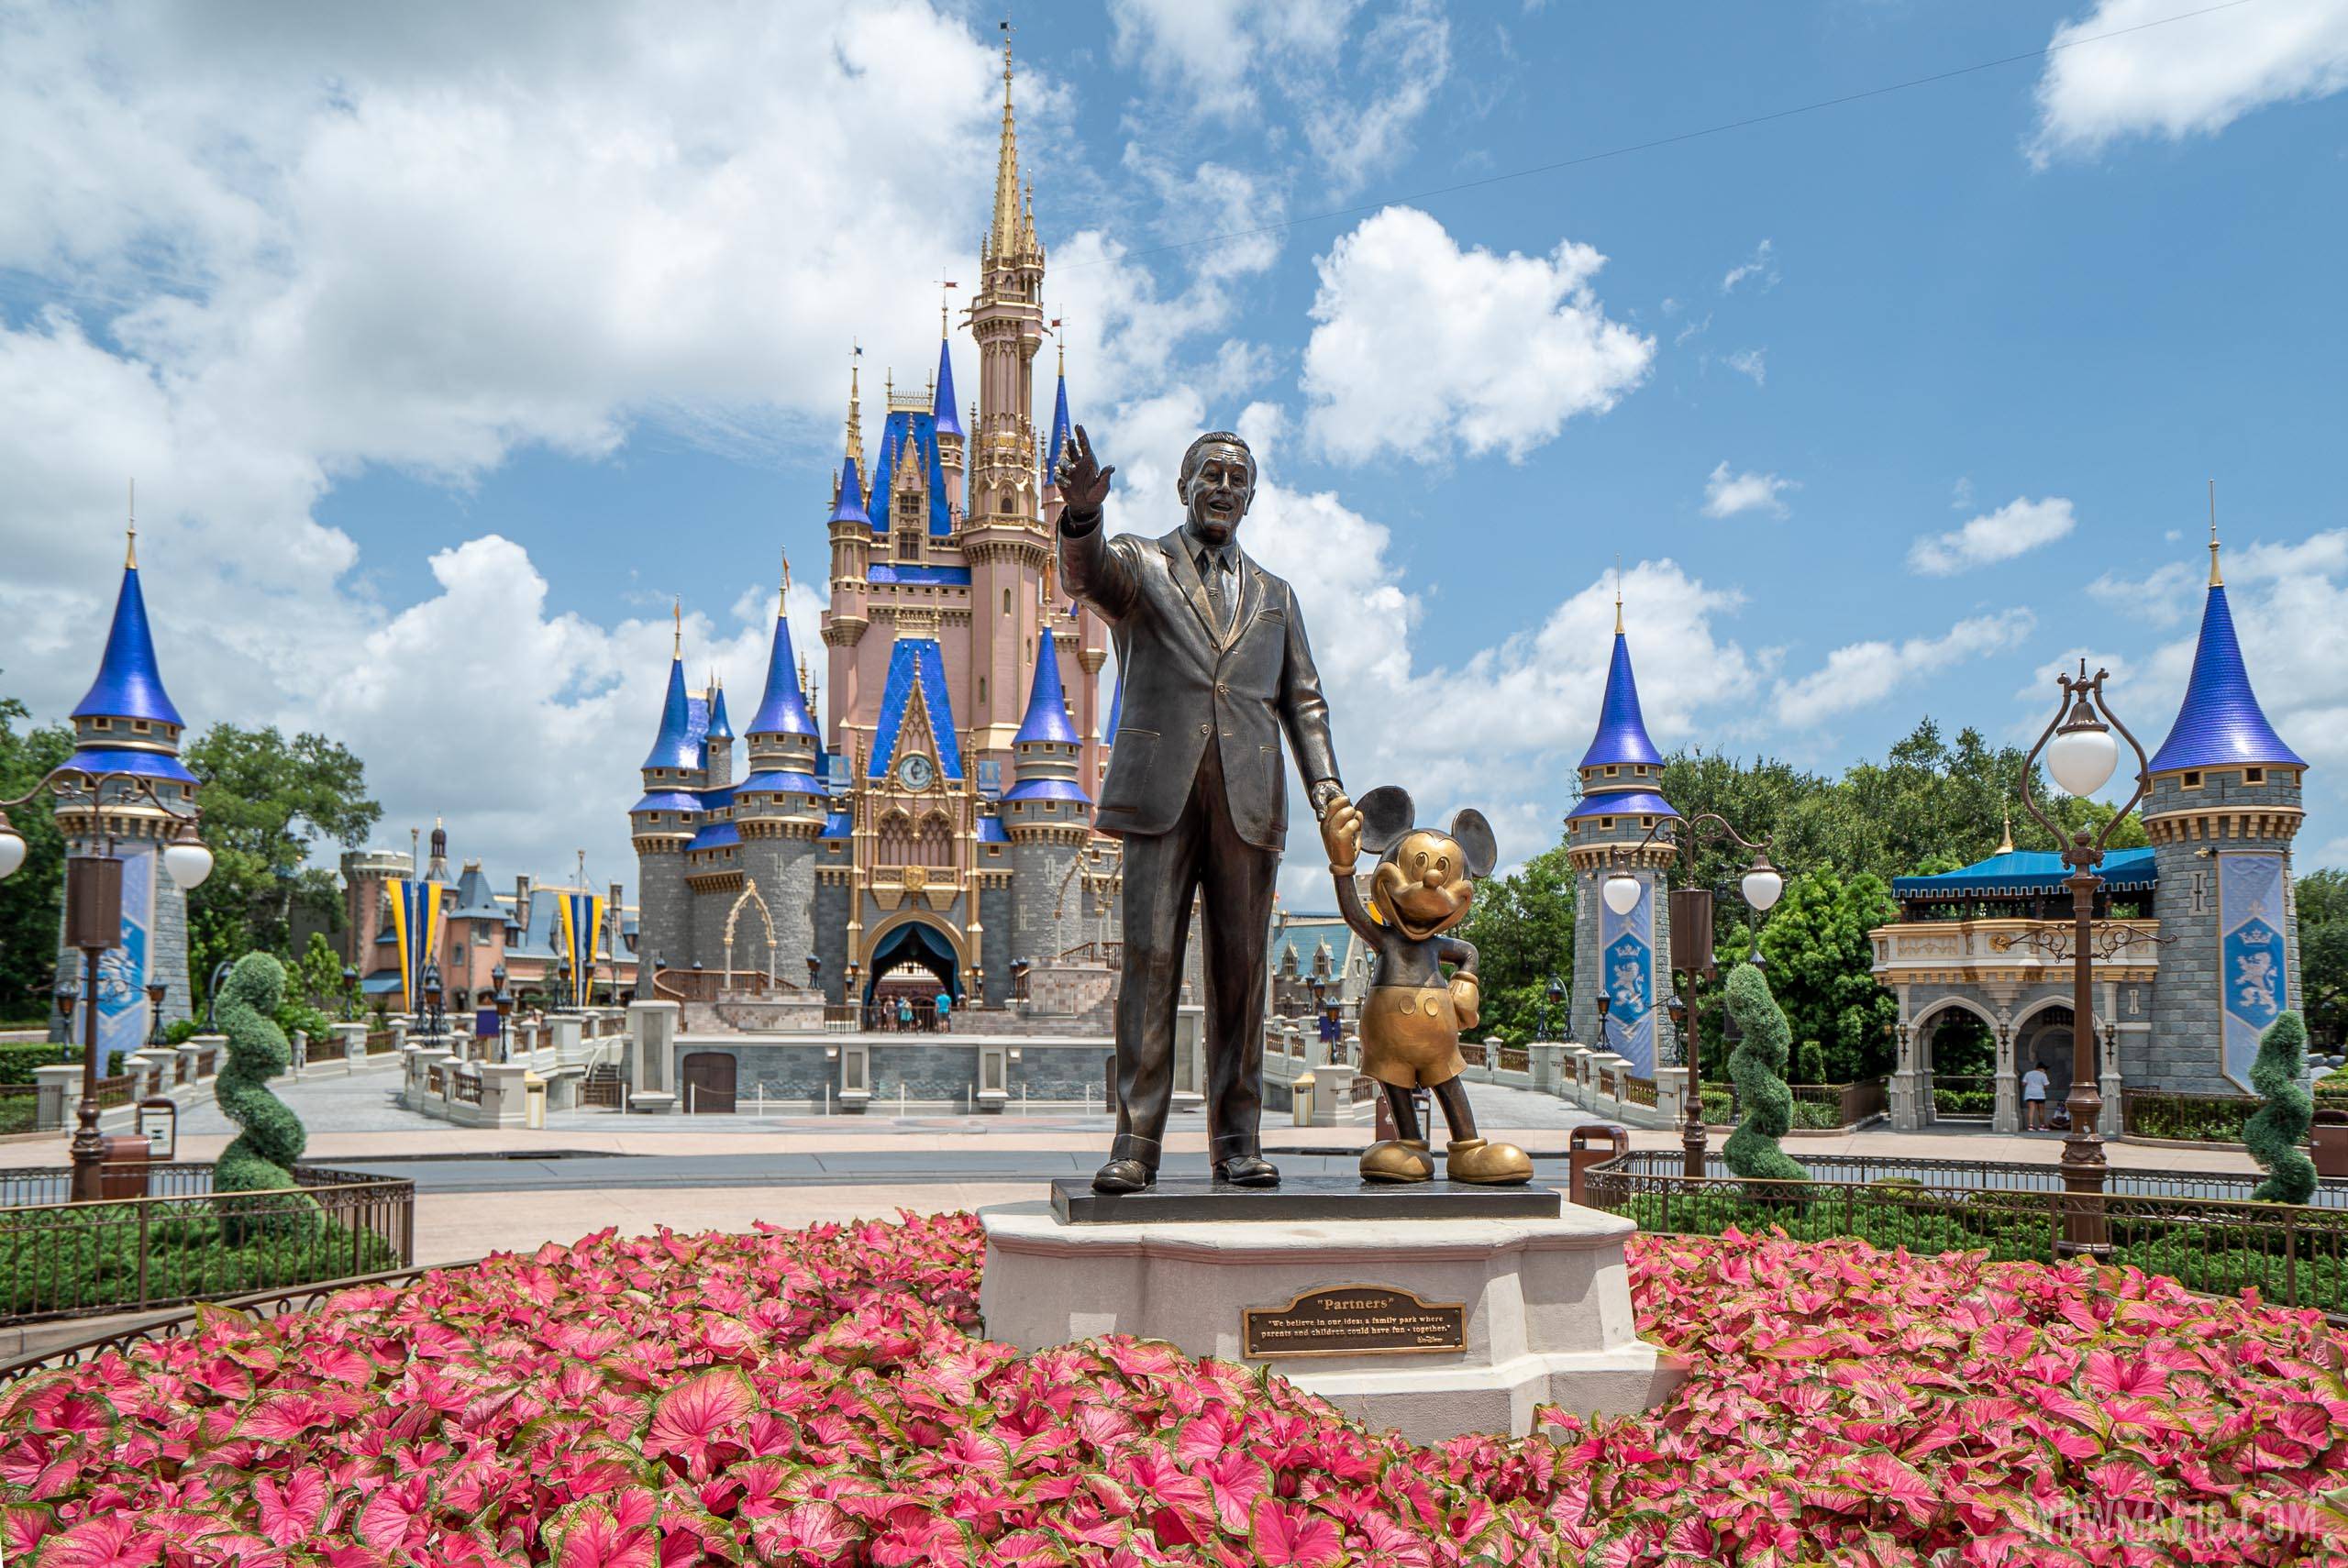 Magic Kingdom reopens to all guests